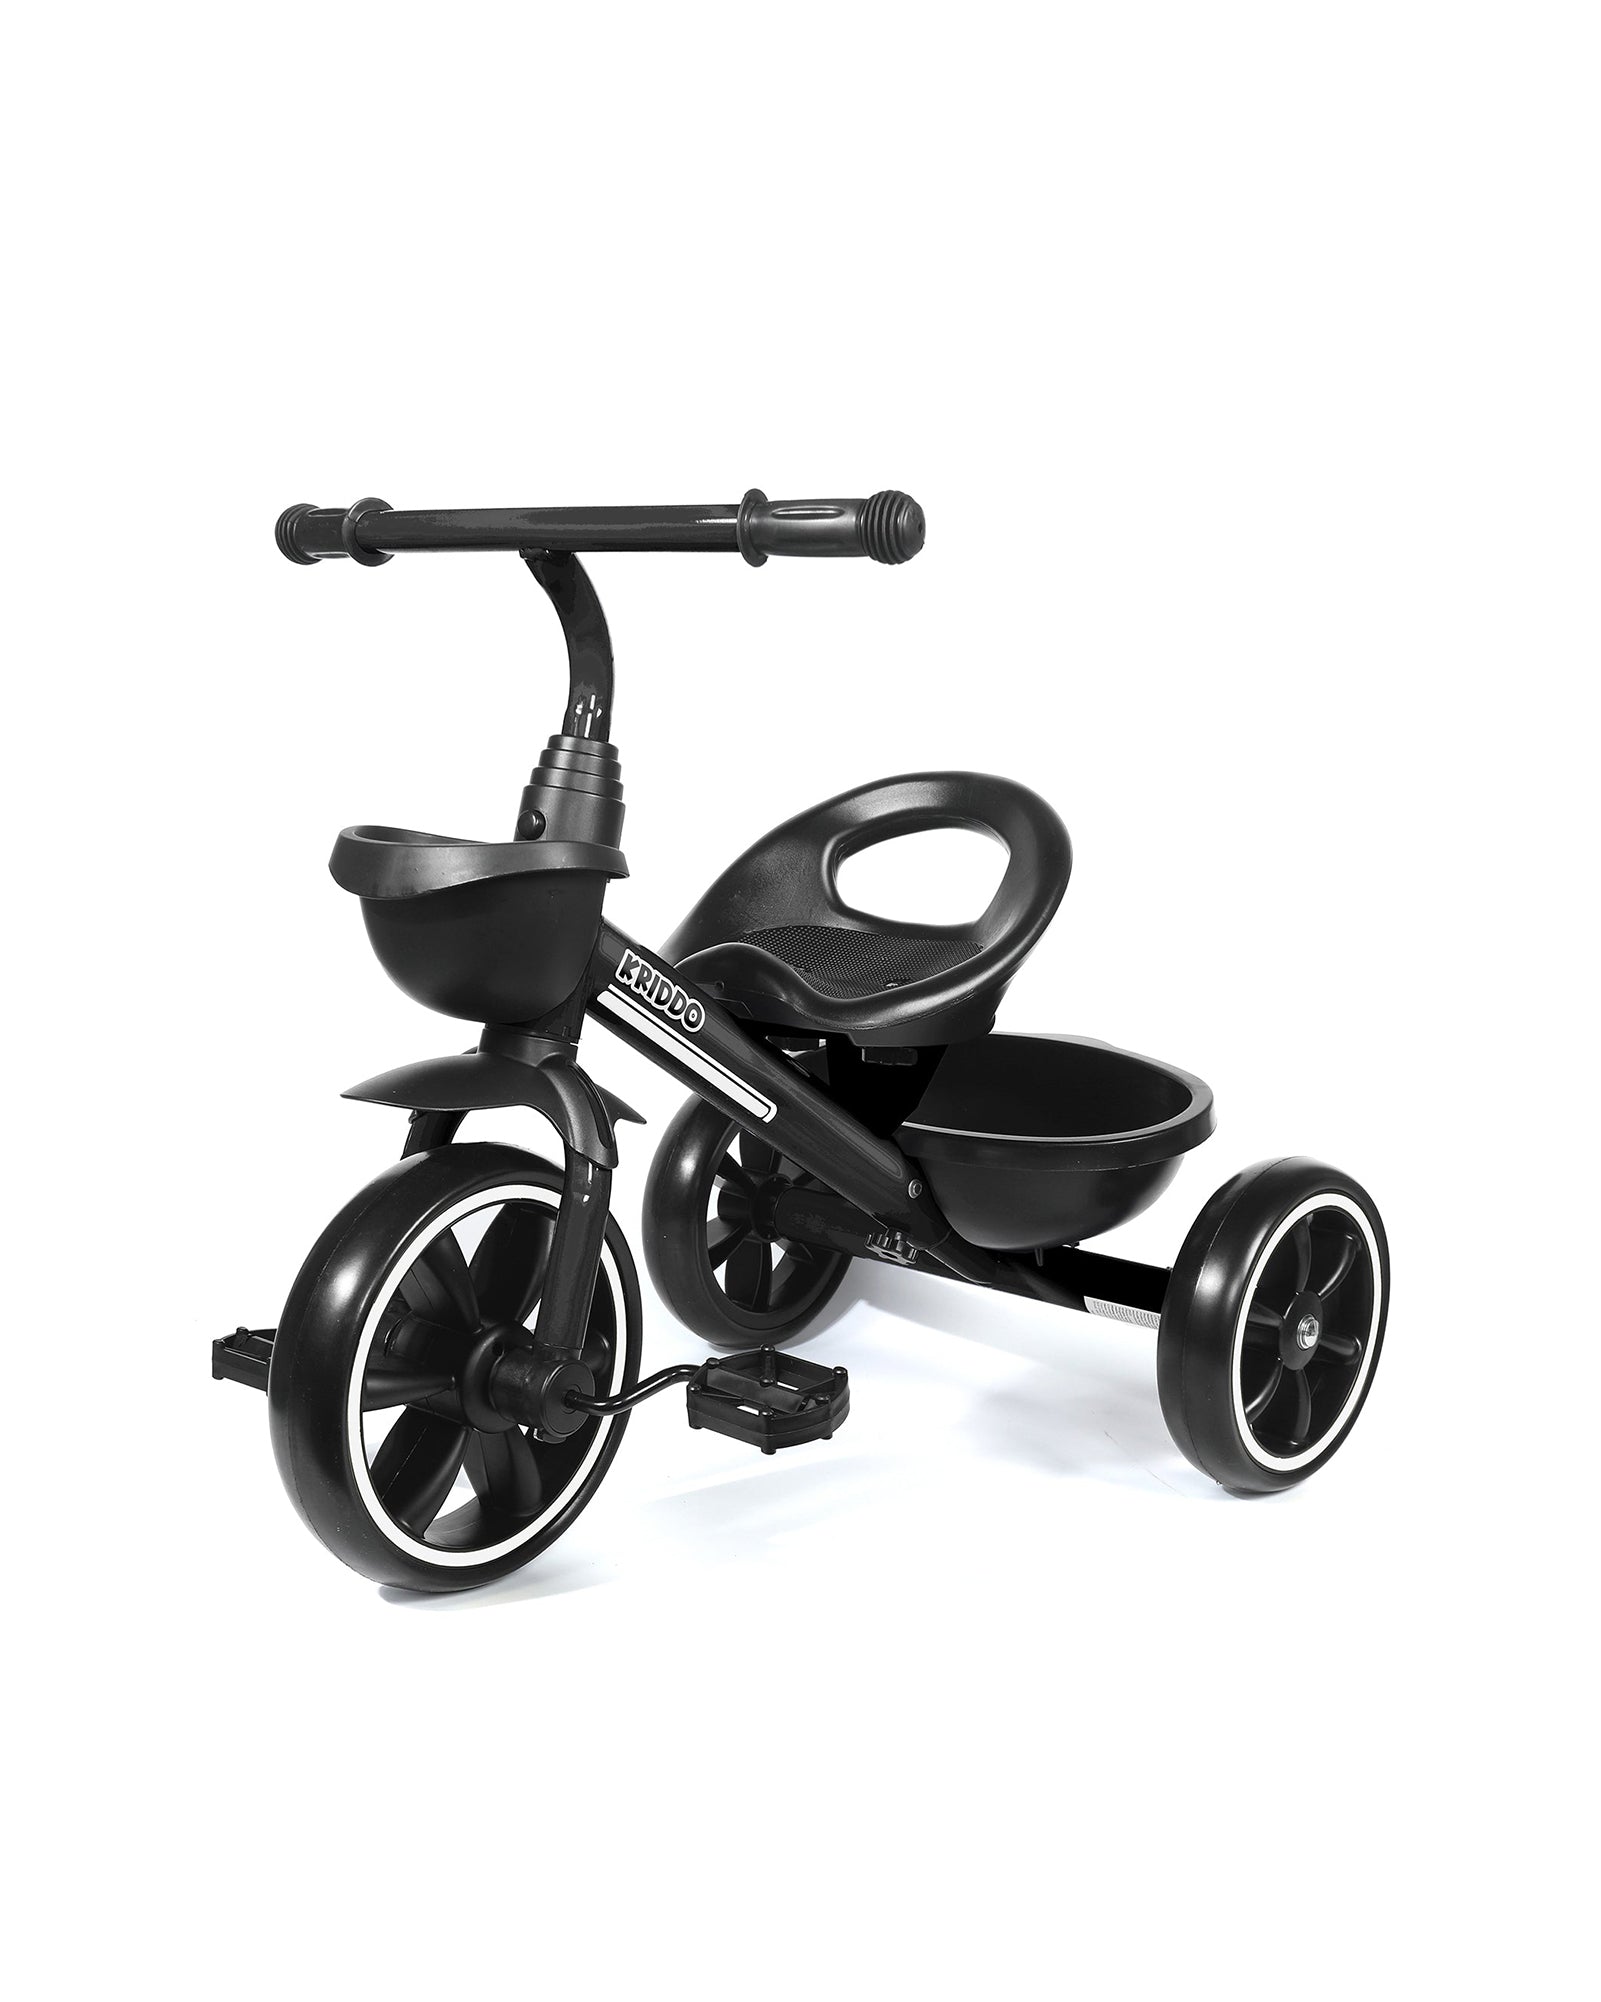 KRIDDO Kids Tricycles for 2- 5 Years, Gift Toddler Tricycles for 2-5 Year Olds, Easy Assembly, Black